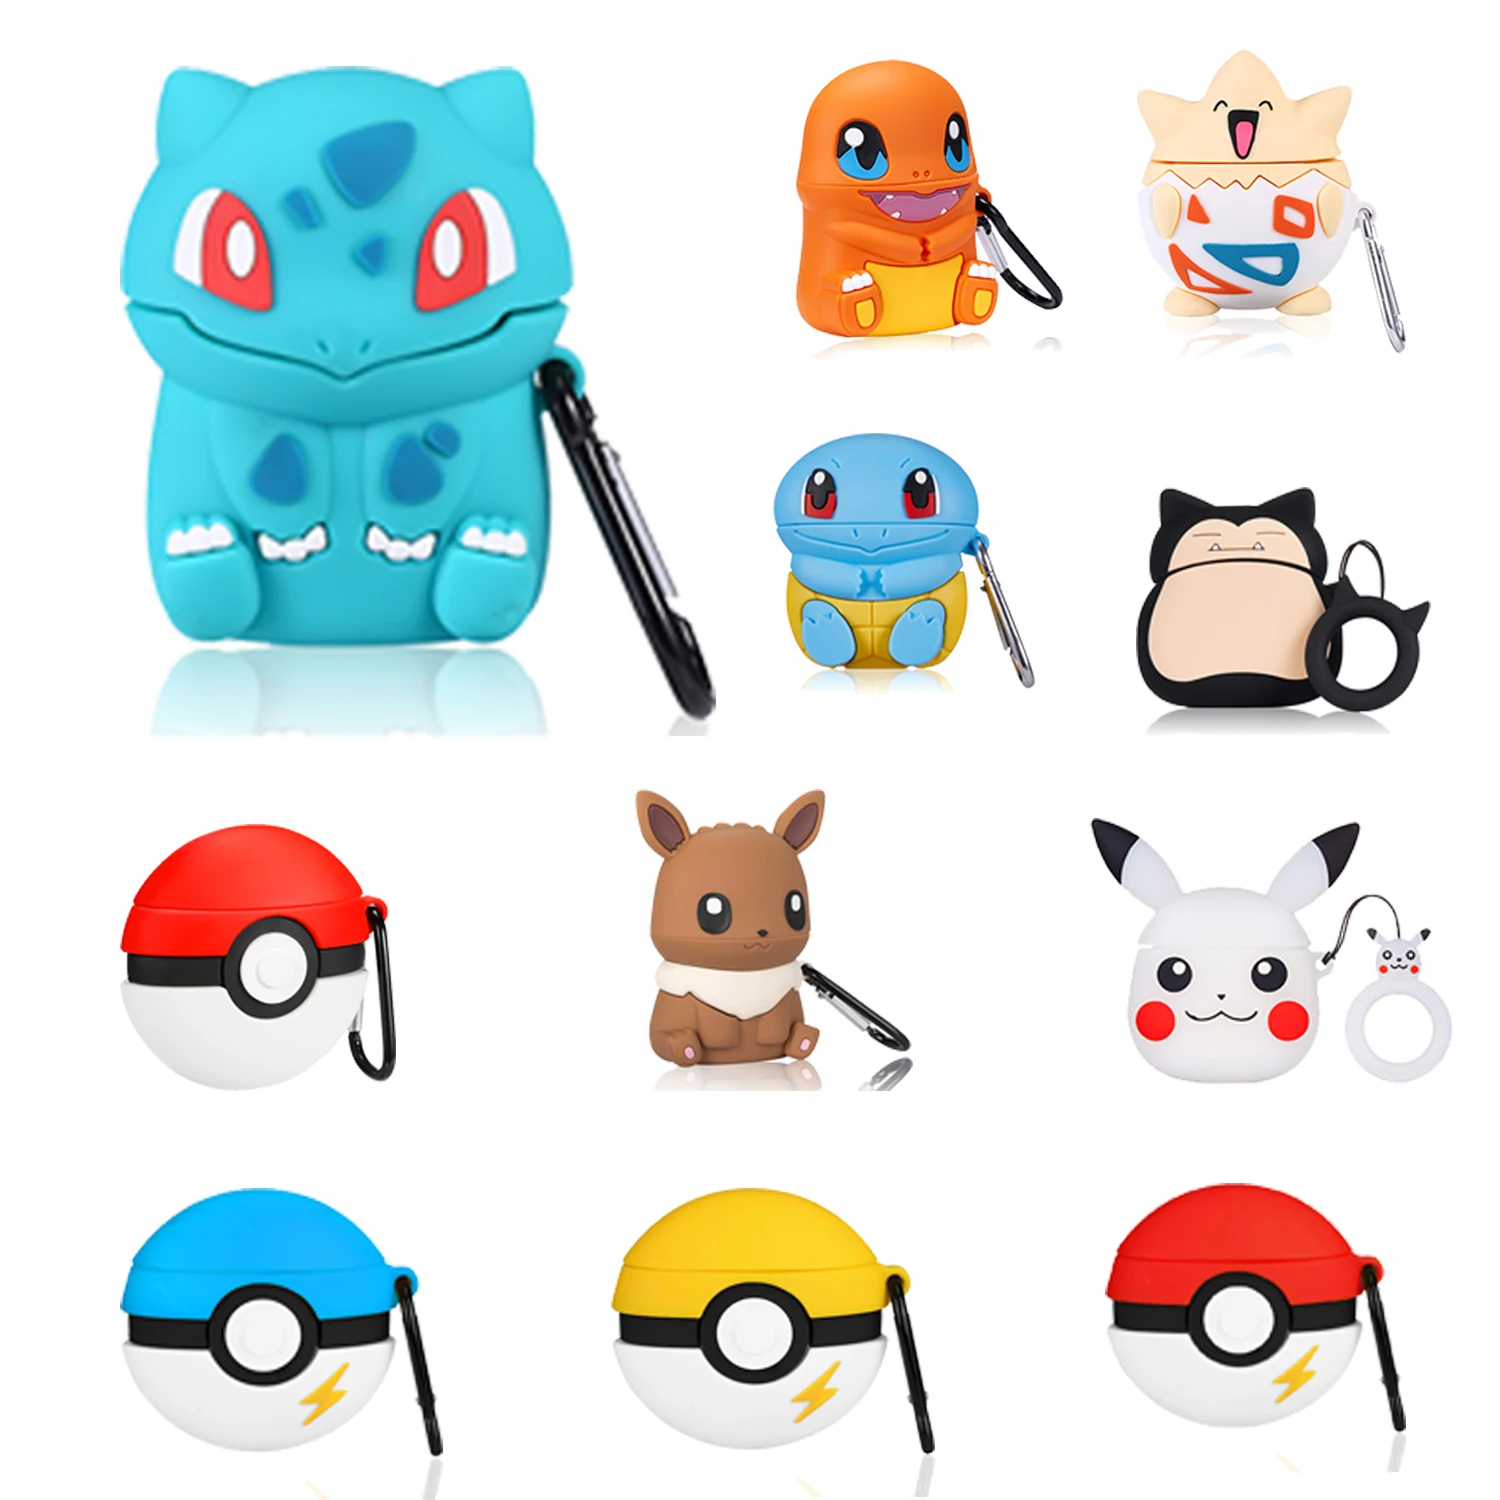 

Wholesale Custom Pretty Cute Anime For Cartoon Pokemon for Airpods Case Cover For Airpod 1/2, Multiple colors